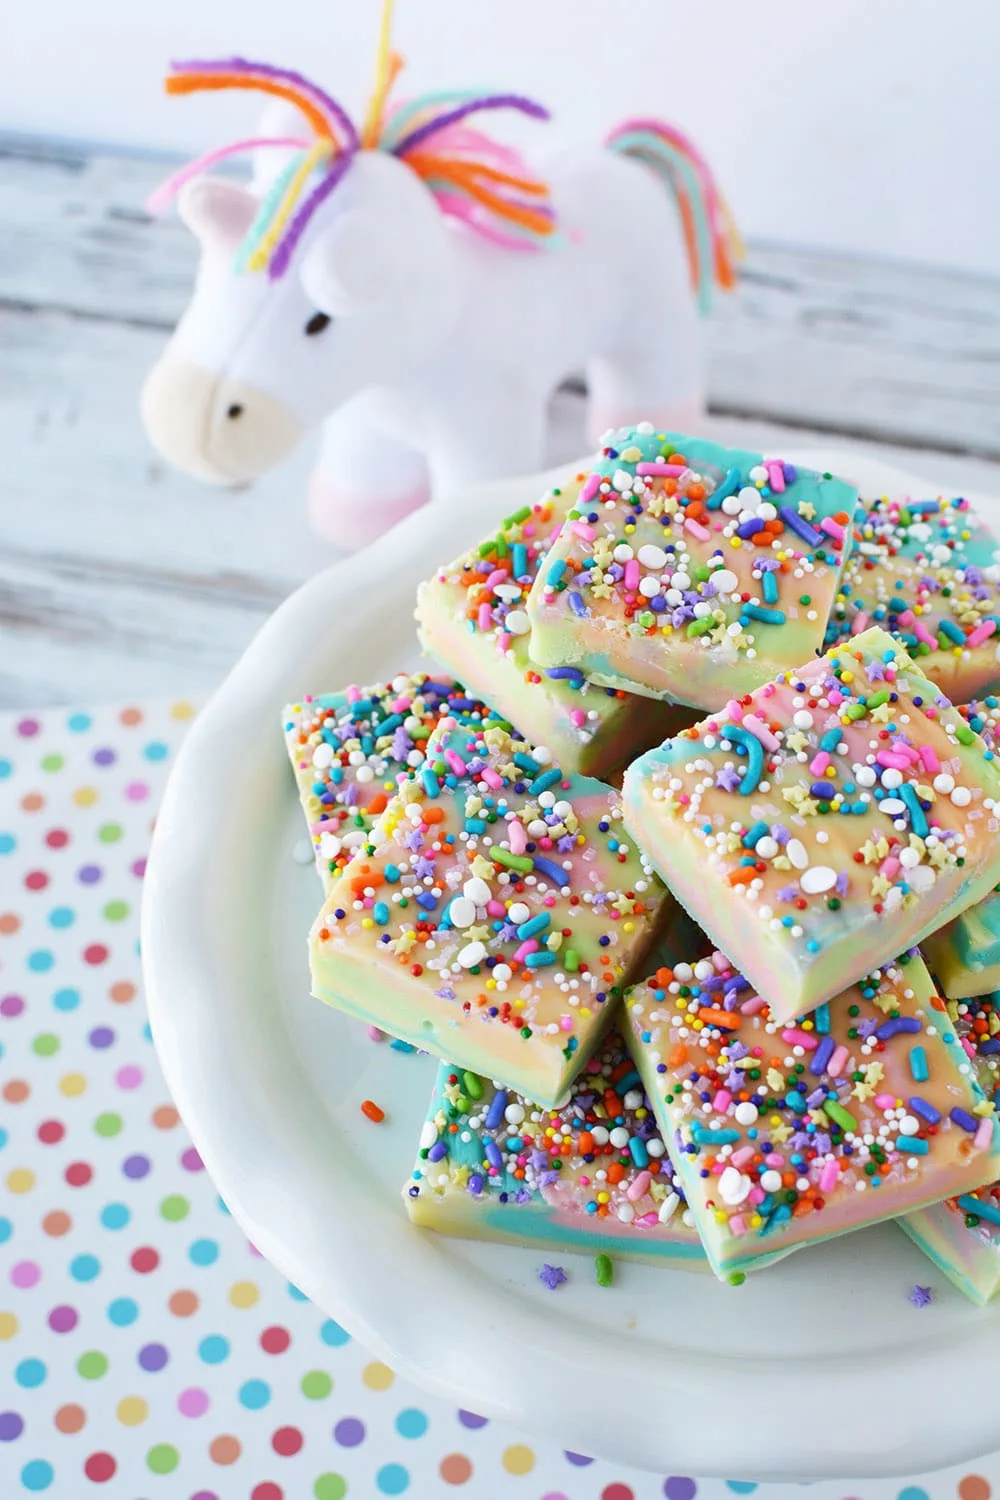 Unicorn fudge on a plate with a unicorn plush toy on the table.